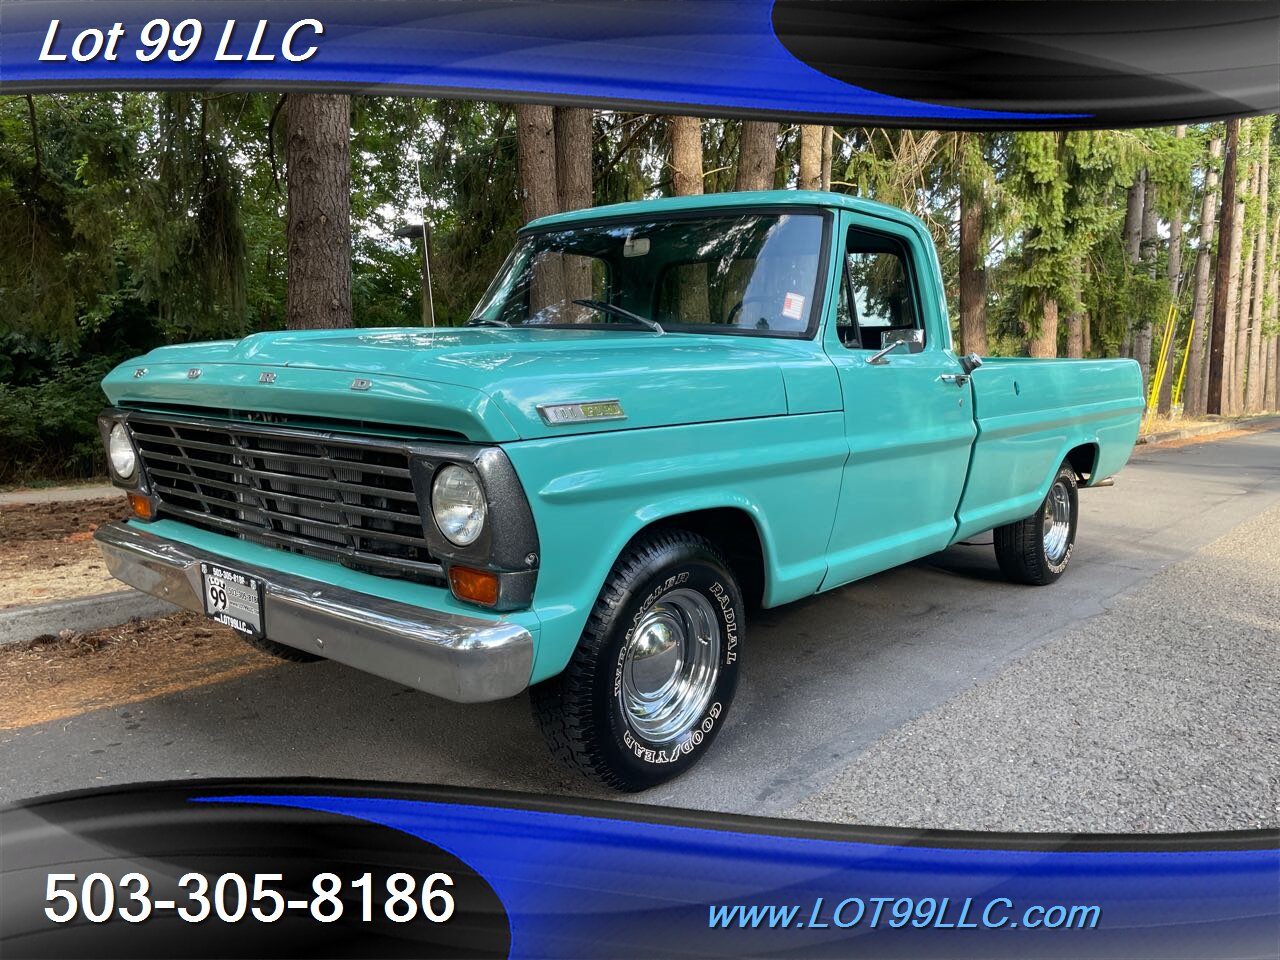 1967 Ford F-100 302 V8  Long Bed No Rust Solid Truck   - Photo 2 - Milwaukie, OR 97267